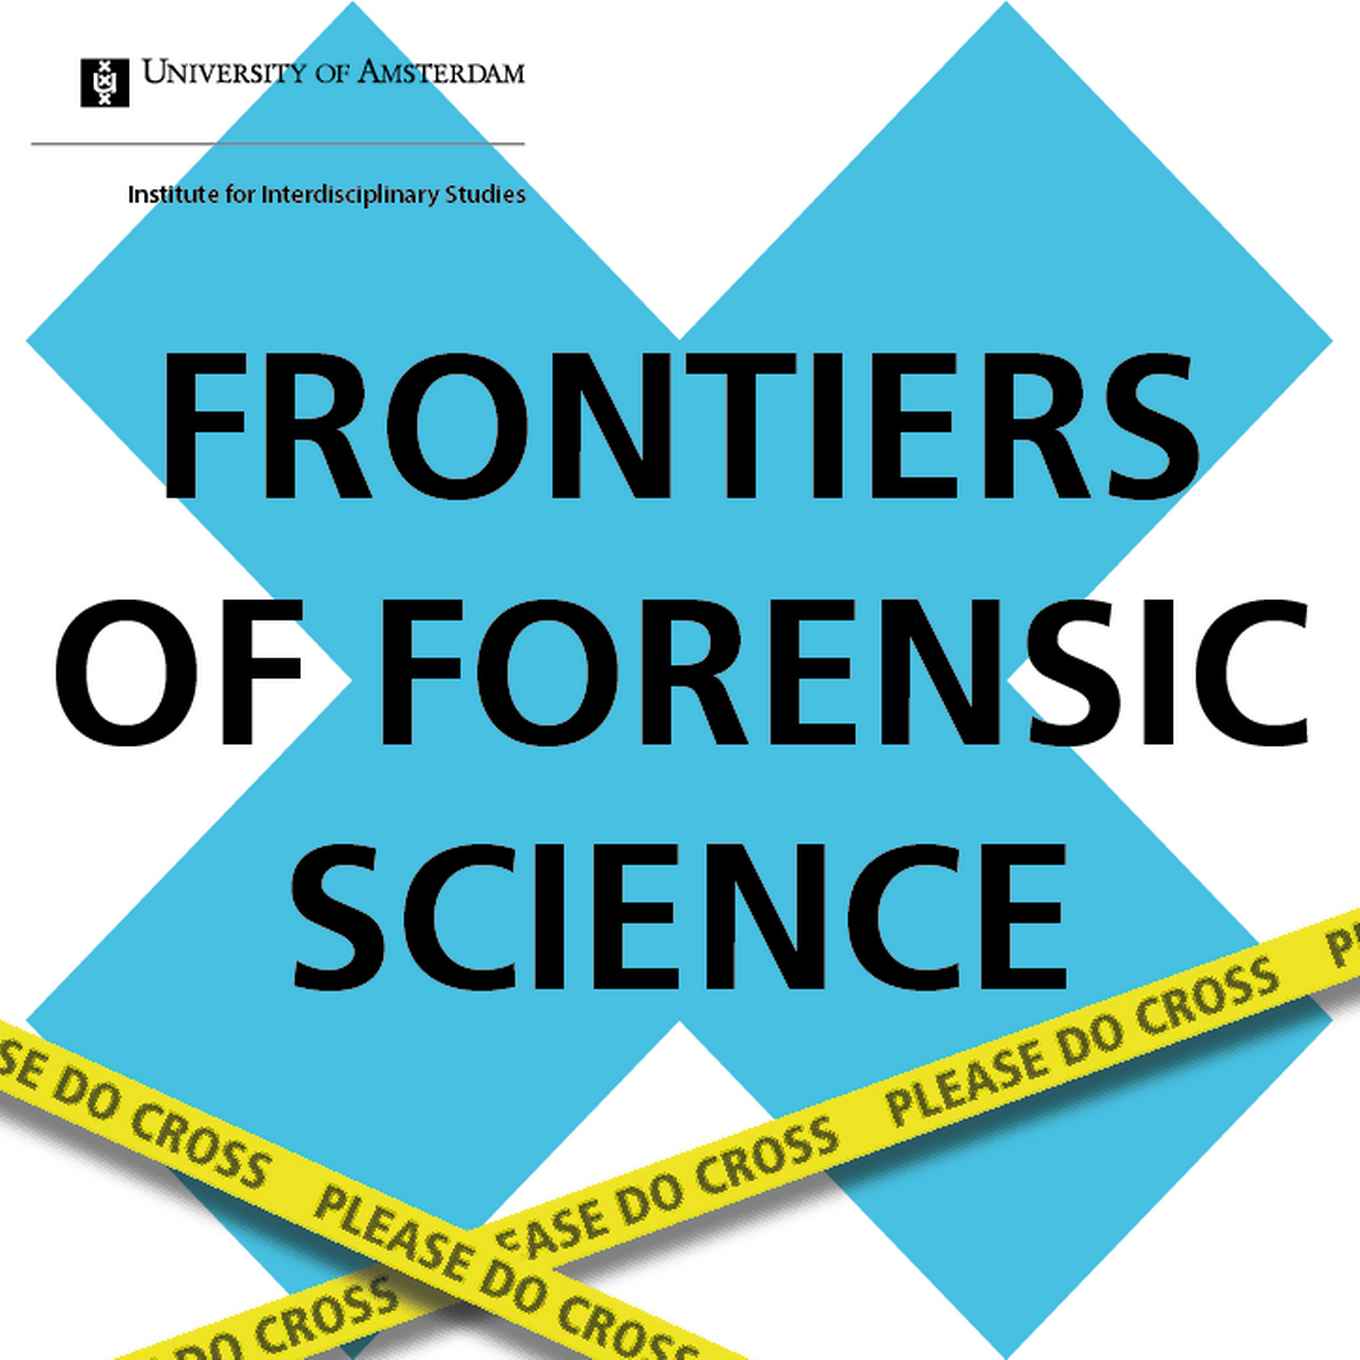 Frontiers of Forensic Science